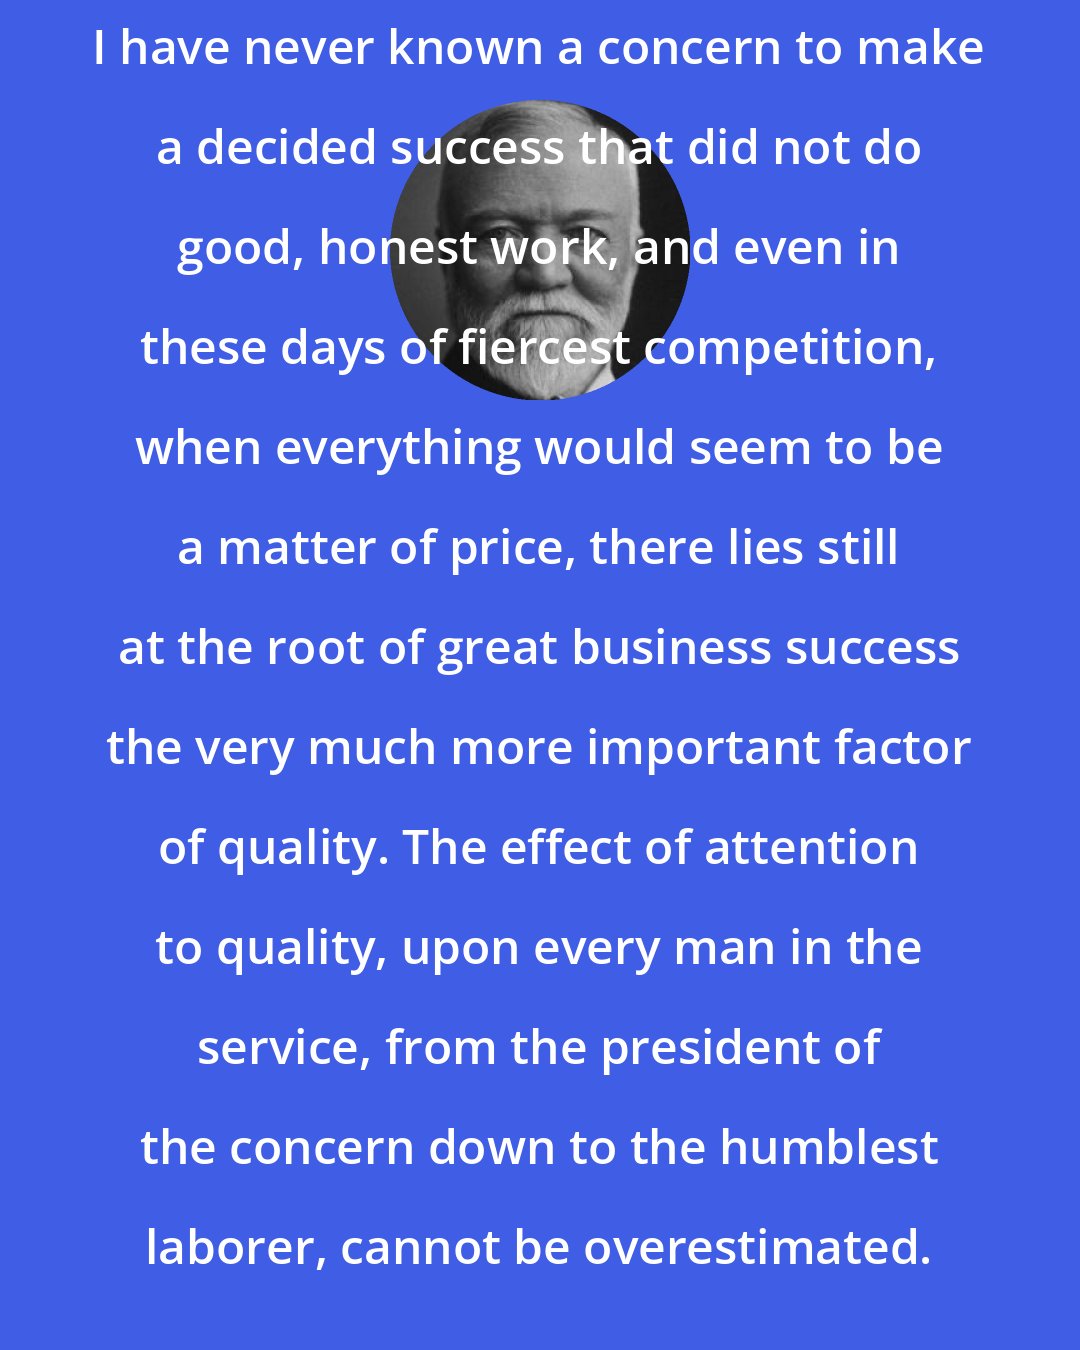 Andrew Carnegie: I have never known a concern to make a decided success that did not do good, honest work, and even in these days of fiercest competition, when everything would seem to be a matter of price, there lies still at the root of great business success the very much more important factor of quality. The effect of attention to quality, upon every man in the service, from the president of the concern down to the humblest laborer, cannot be overestimated.